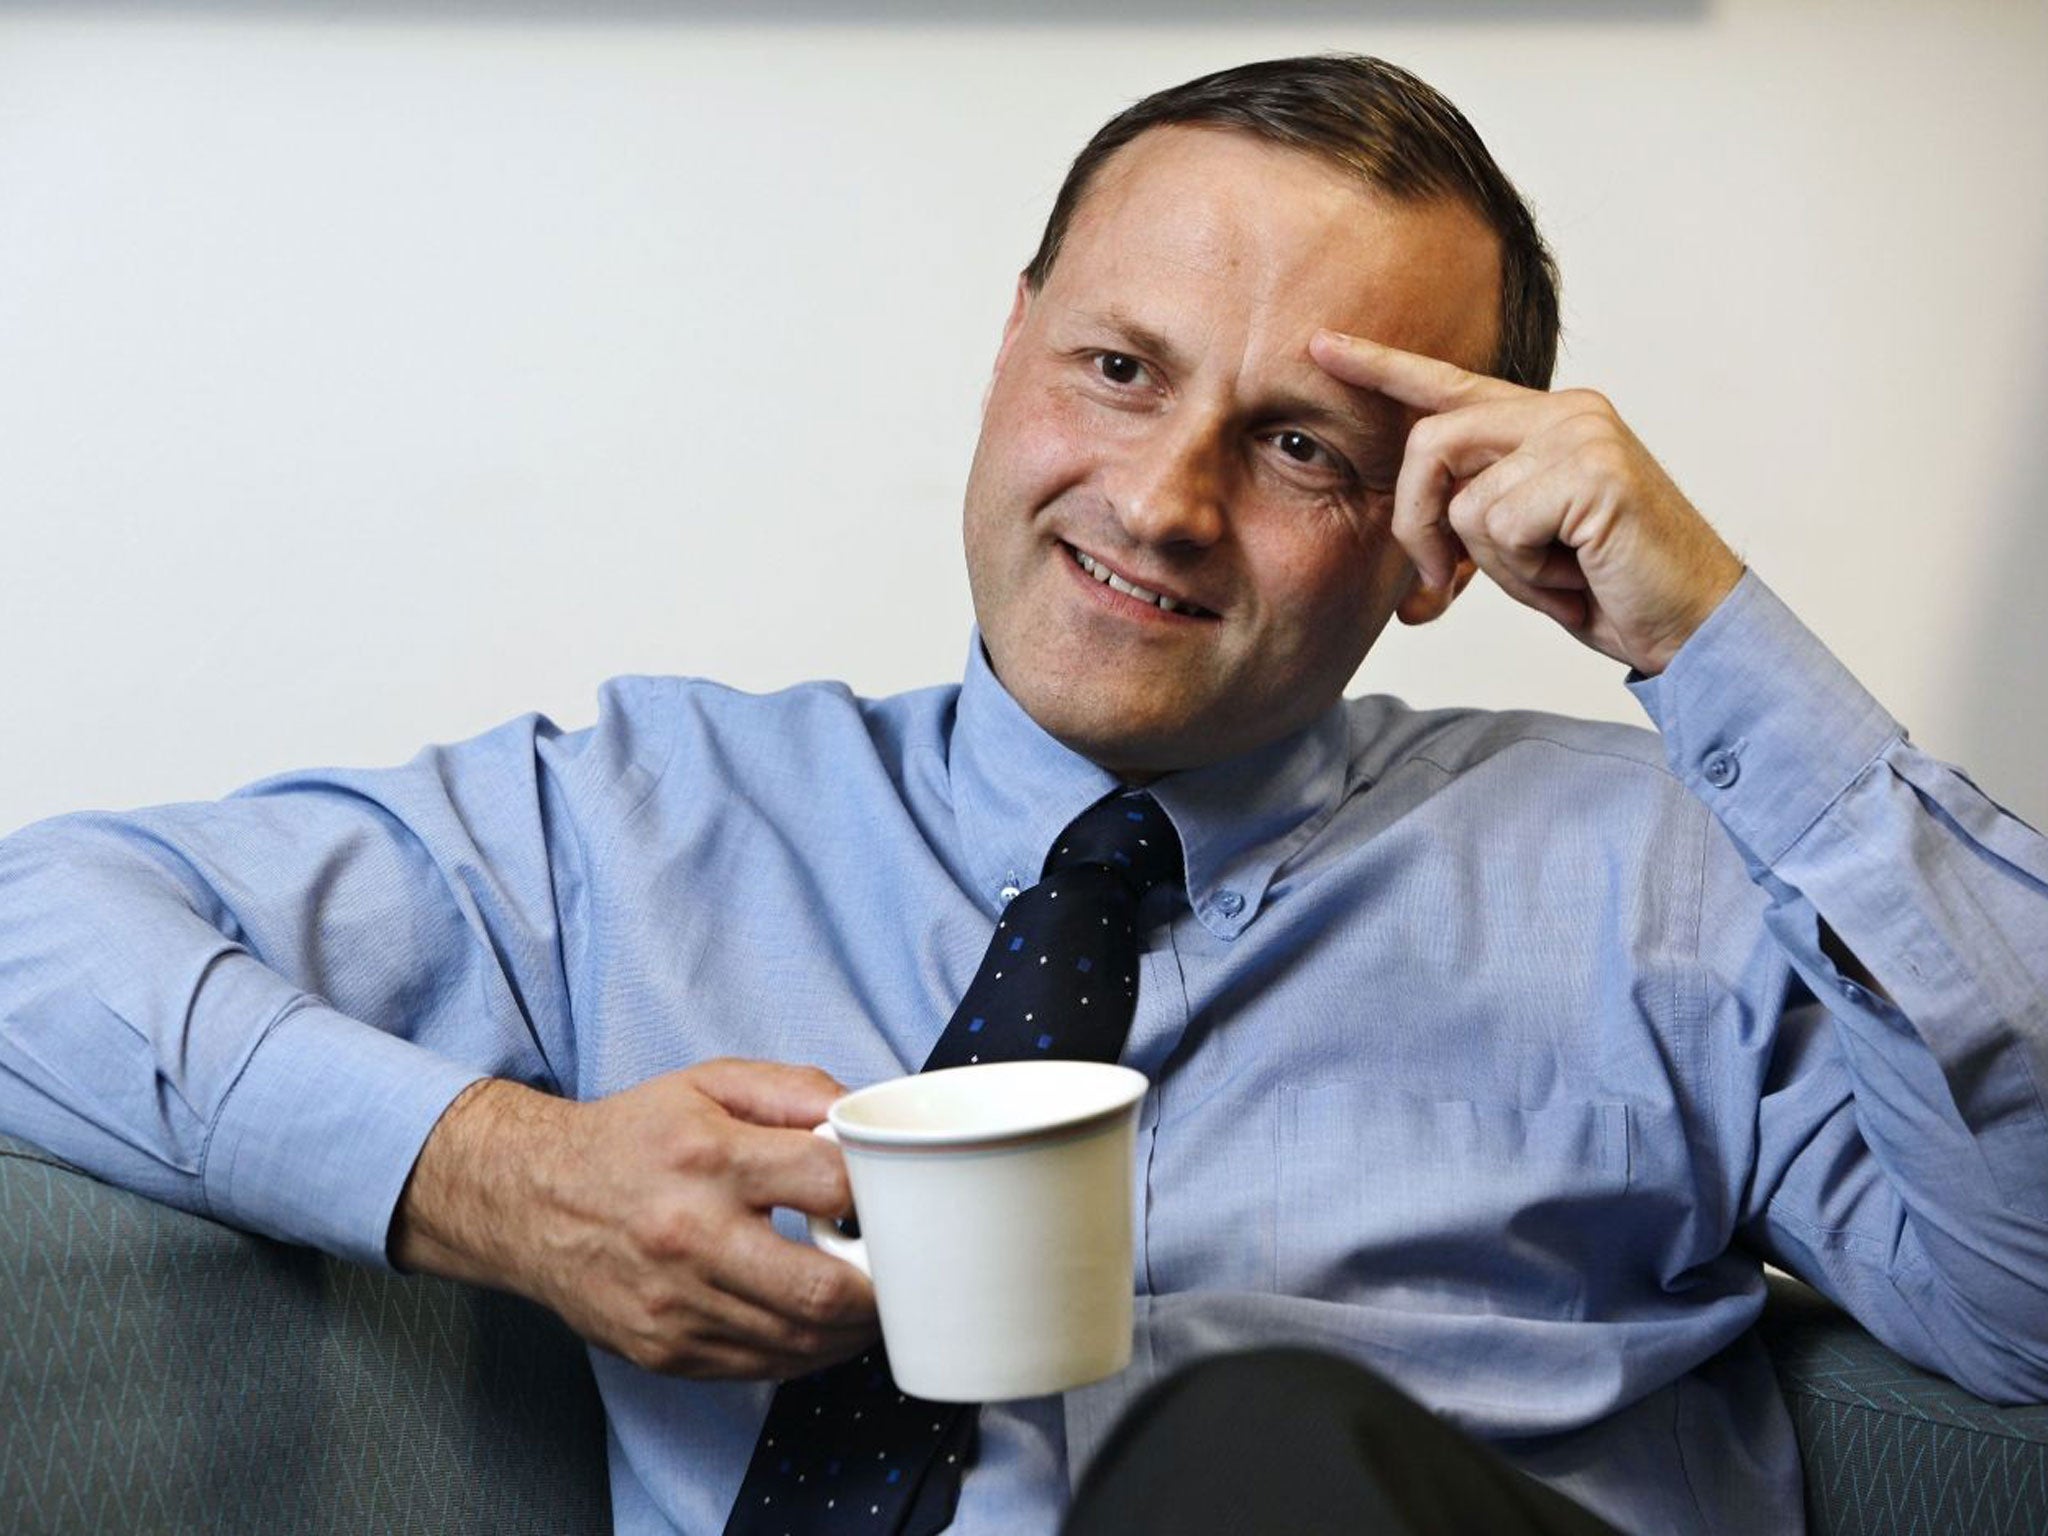 Pensions minister Steve Webb advises: 'Your first step should be to speak to Pension Wise [the government service] to understand the steps you need to take'